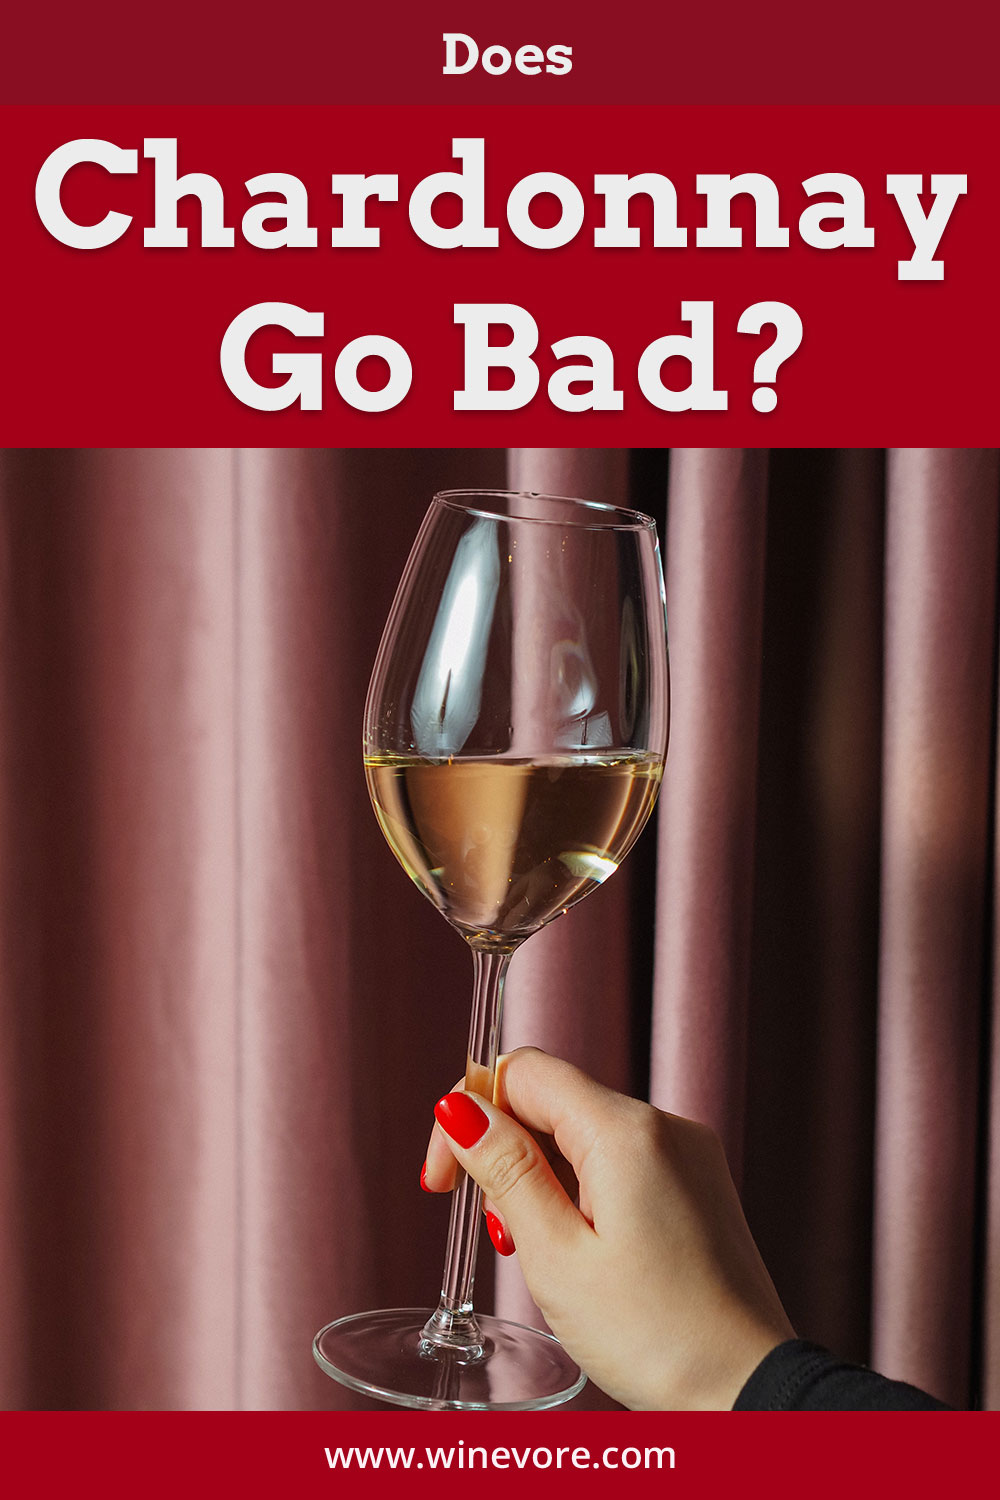 A glass of chardonnay in a woman's hand - does it go bad?